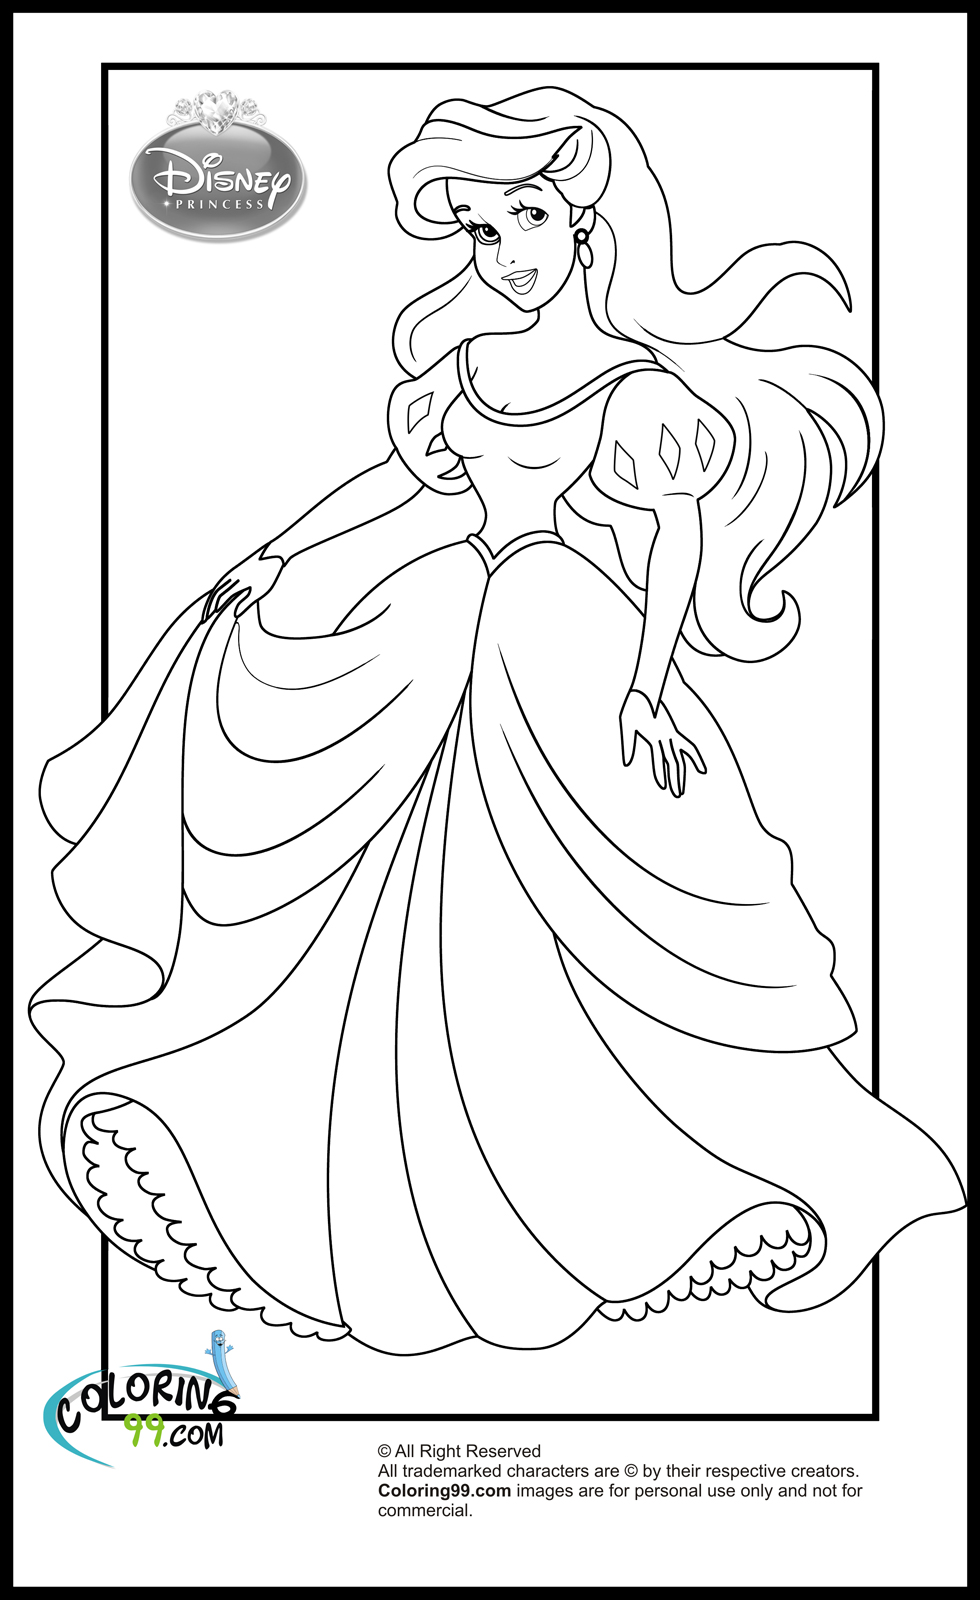 colouring pages for disney princesses alosrigons disney coloring pages free pages for disney princesses colouring 